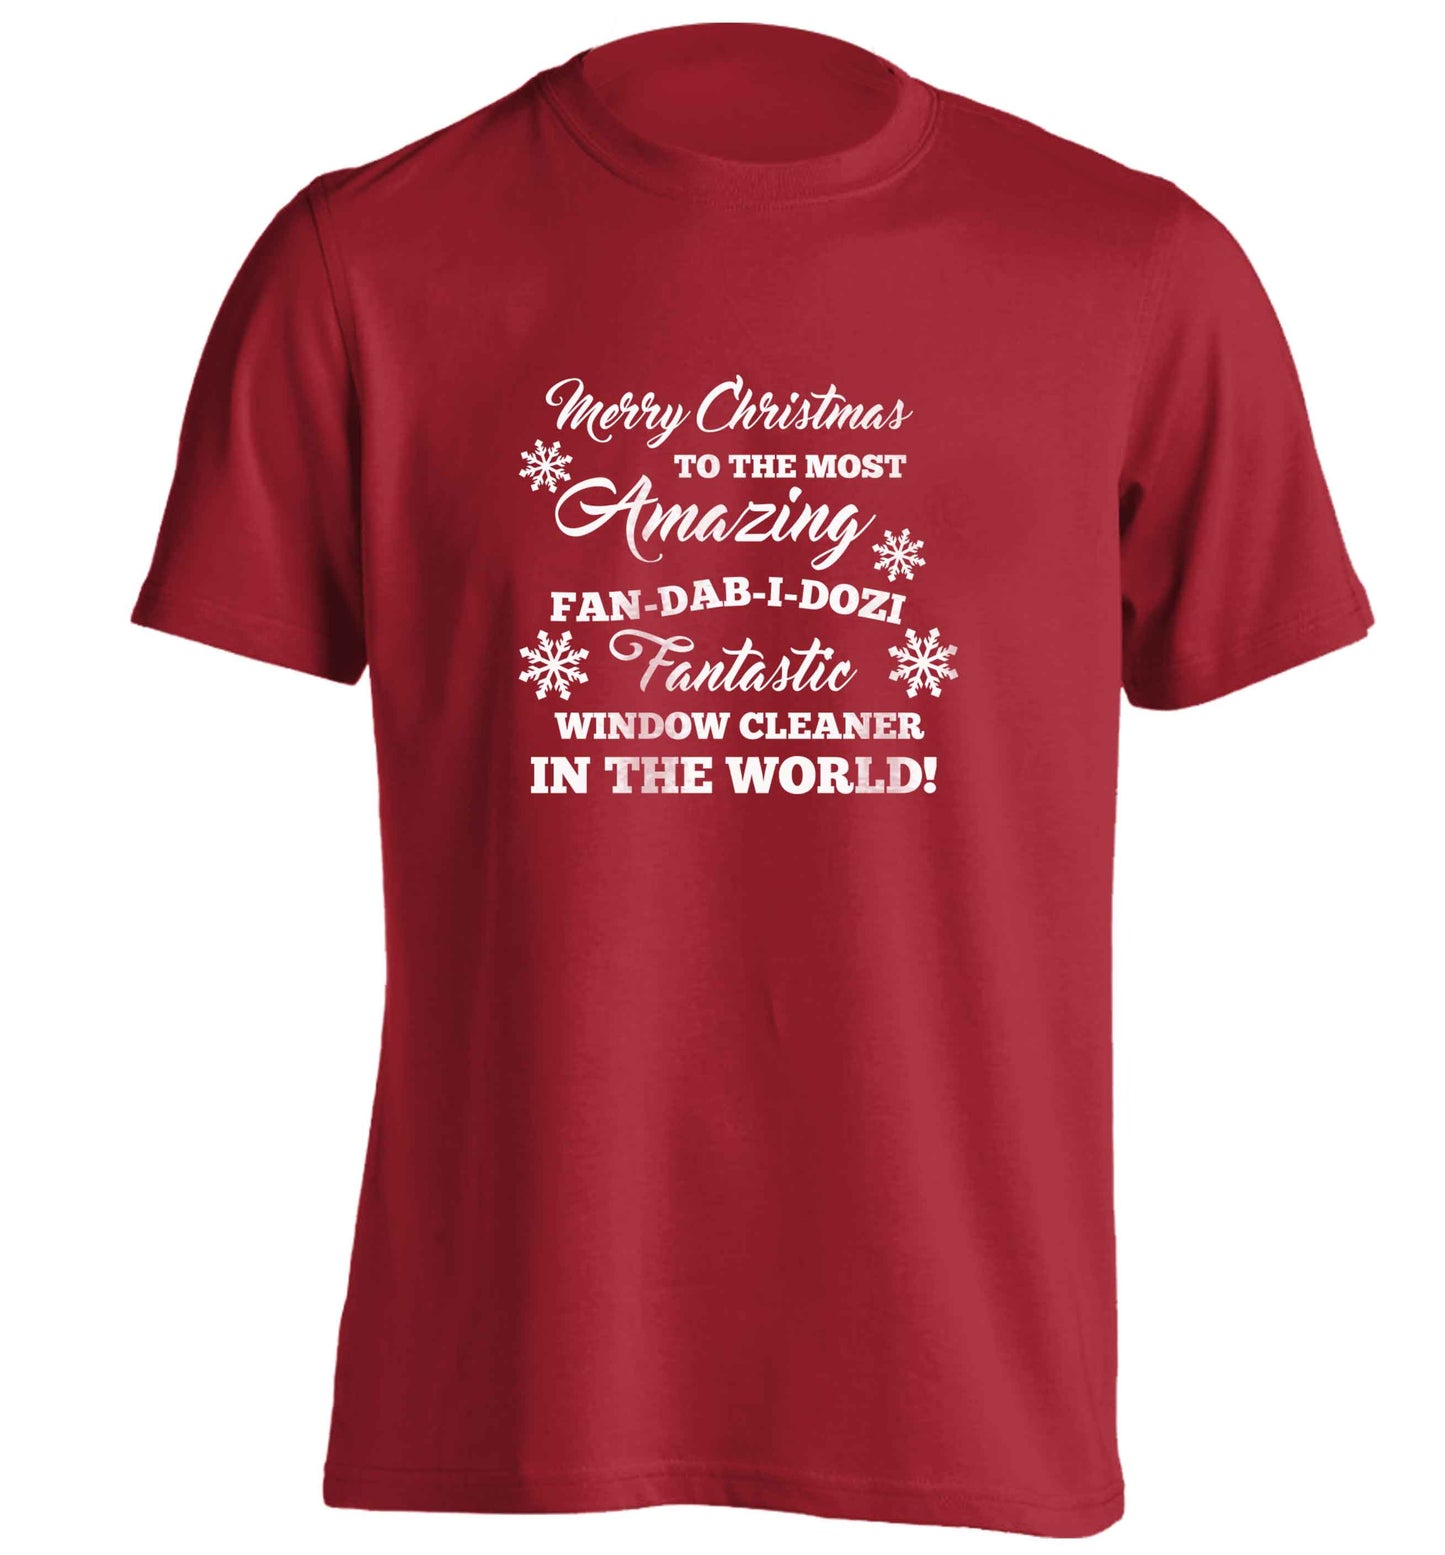 Merry Christmas to the most amazing window cleaner in the world! adults unisex red Tshirt 2XL